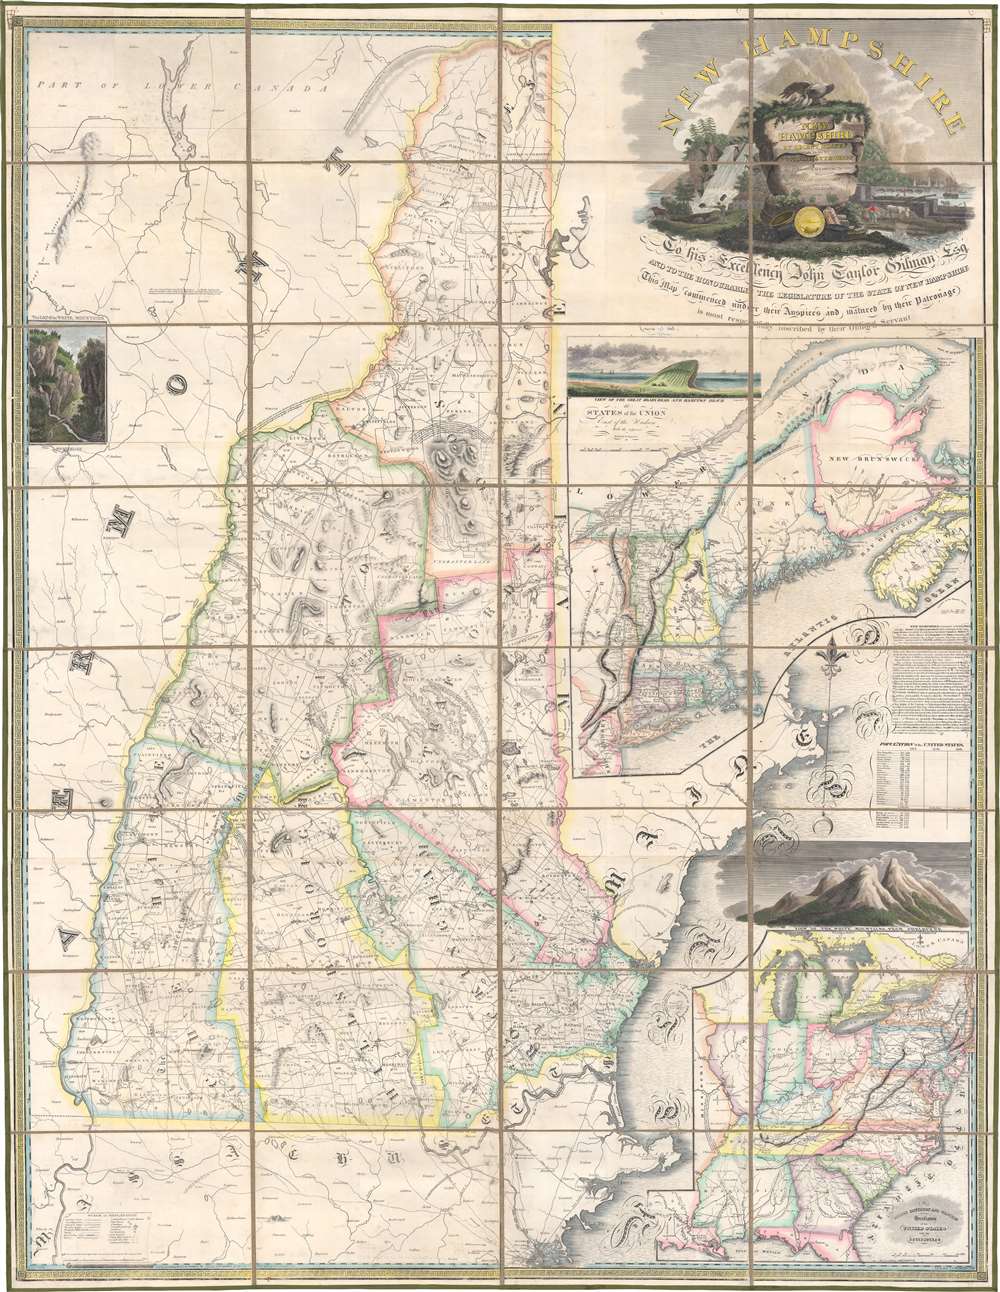 New Hampshire by Recent Survey Made Under the Supreme Authority and Published according to Law by Philip Carrigain Consellor at Law and late Secretary of the State.  / New Hampshire To his Excellency Jon Taylor Gilman Esq. and to the Honourable the Legislature of the State of New Hampshire this Map commenced under their Auspices and matured by their Patronage is most  respectfully inscribed by their Obliged Servant Philip Carrigain. - Main View